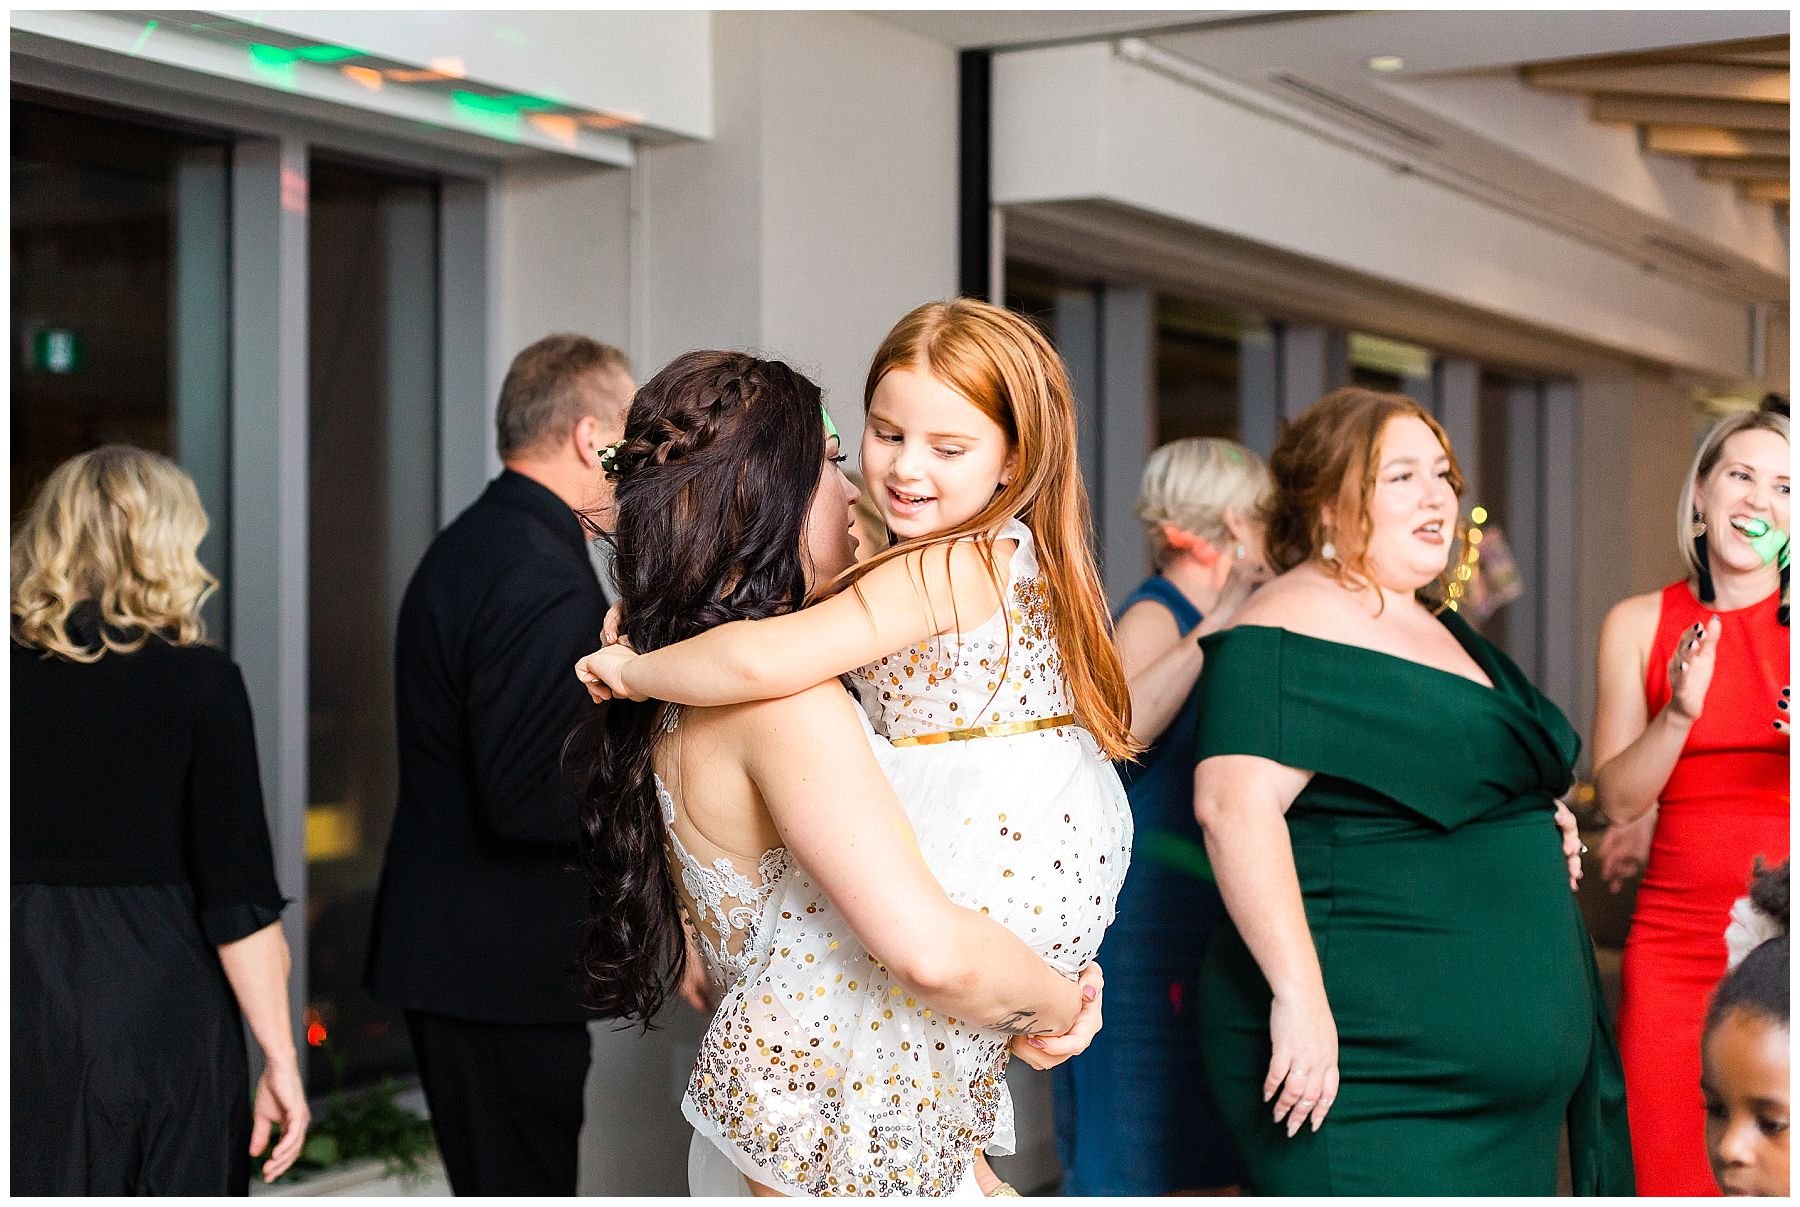 wedding guests dancing at the hotel reception